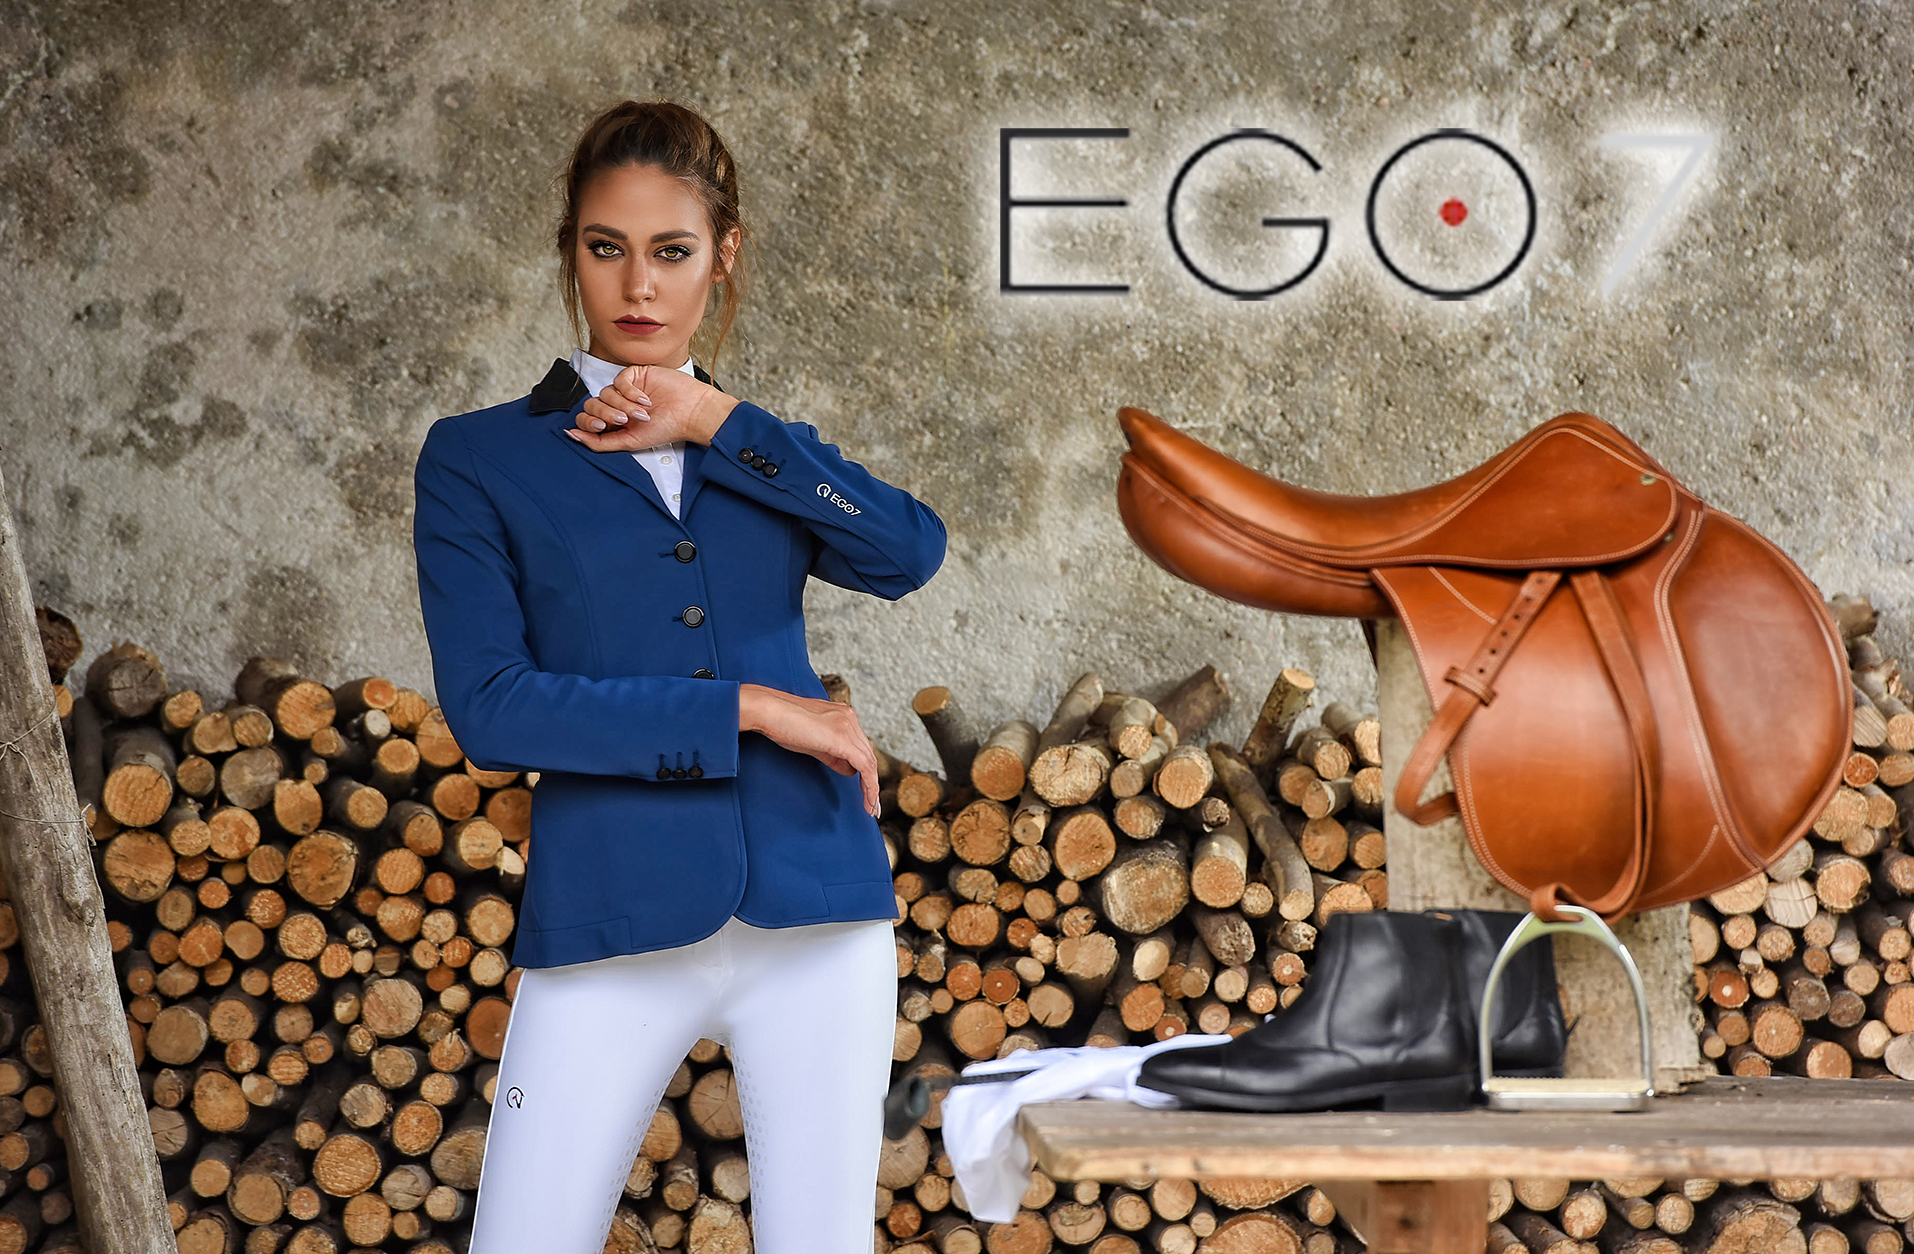 Ego 7 Tall Boots Riding Clothing Italy